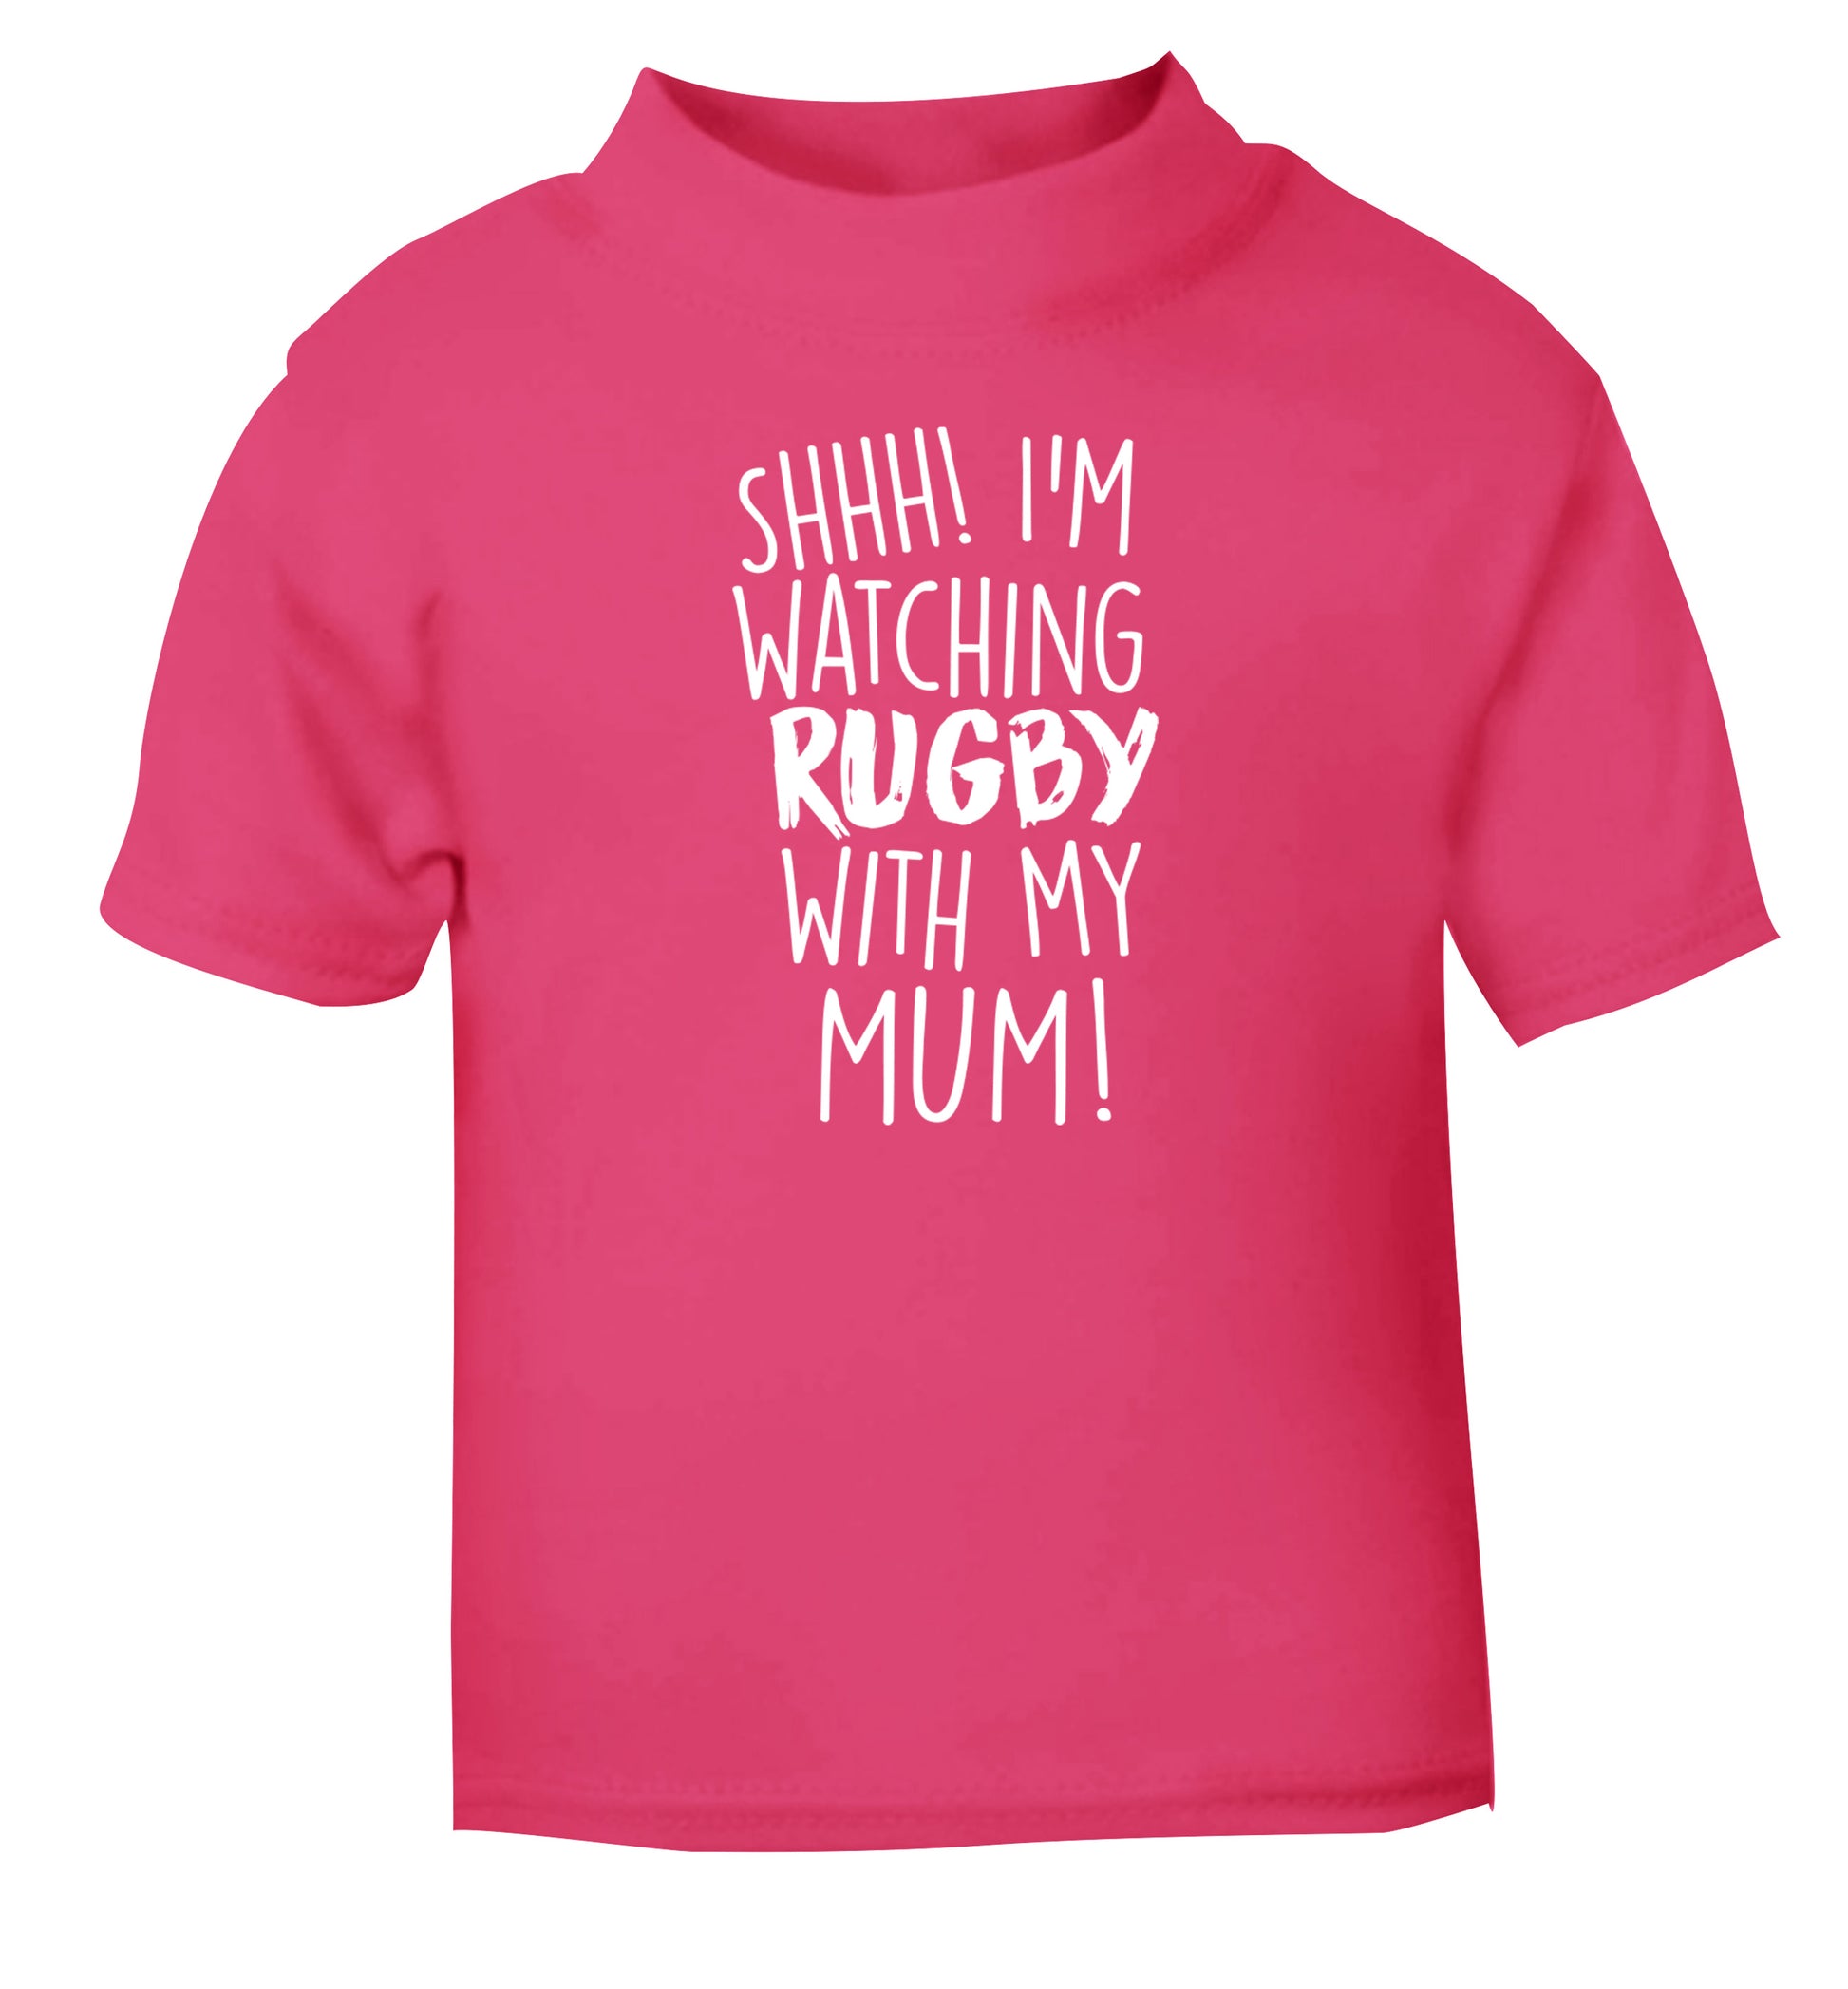 Shh... I'm watching rugby with my mum pink Baby Toddler Tshirt 2 Years